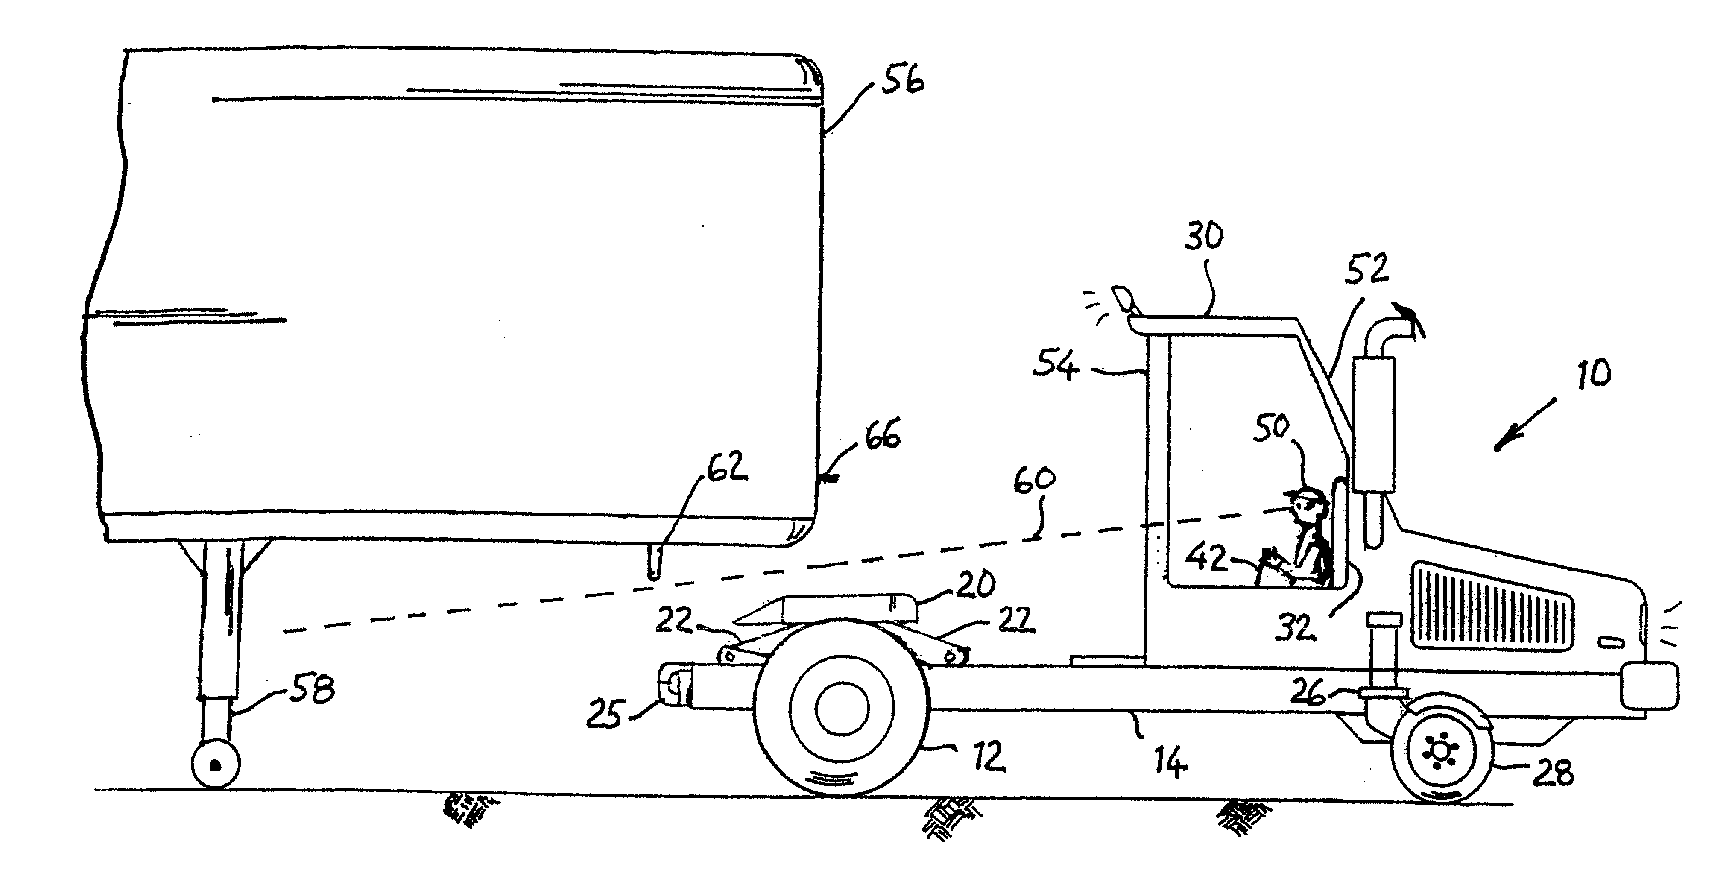 Trailer mule vehicle for moving semi-trailers